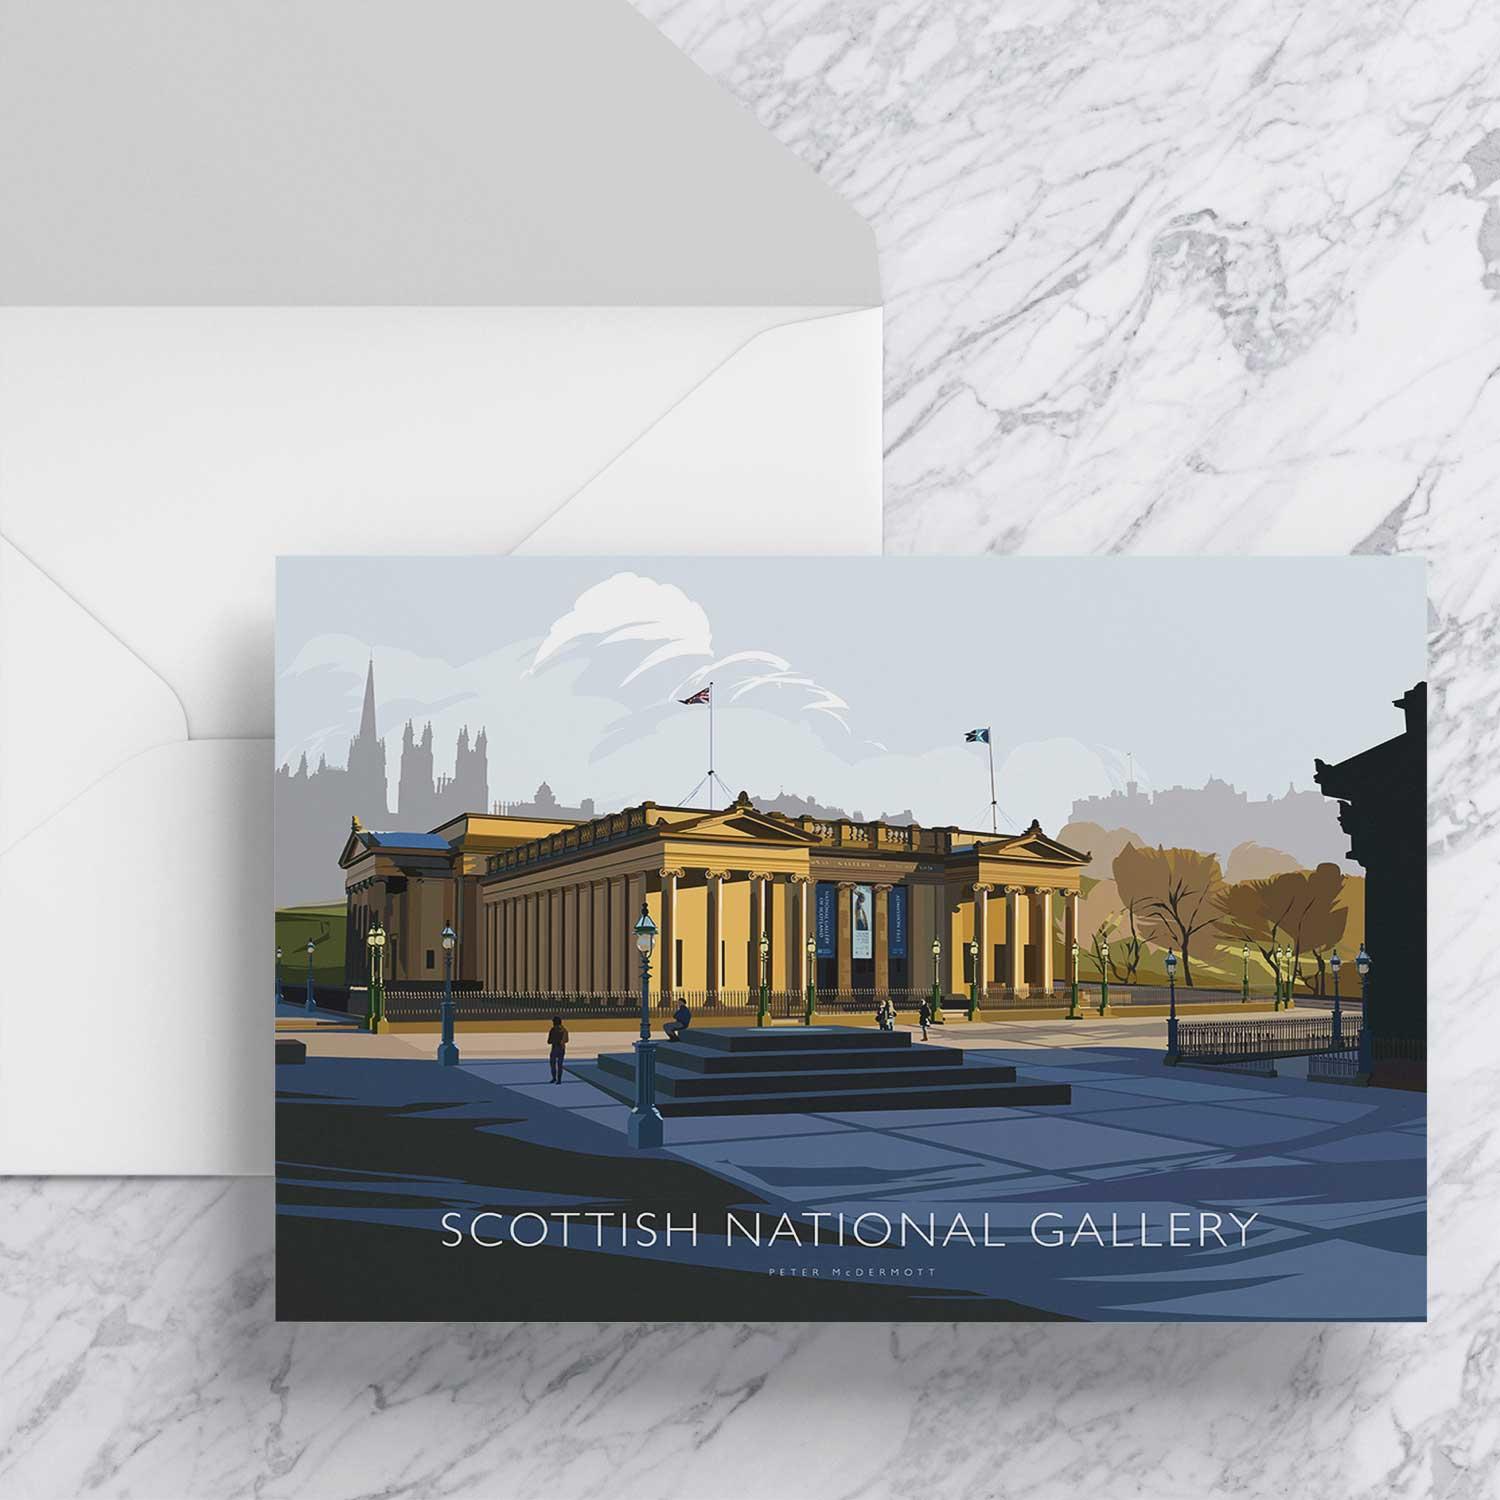 Scottish National Gallery Greeting Card from an original painting by artist Peter McDermott